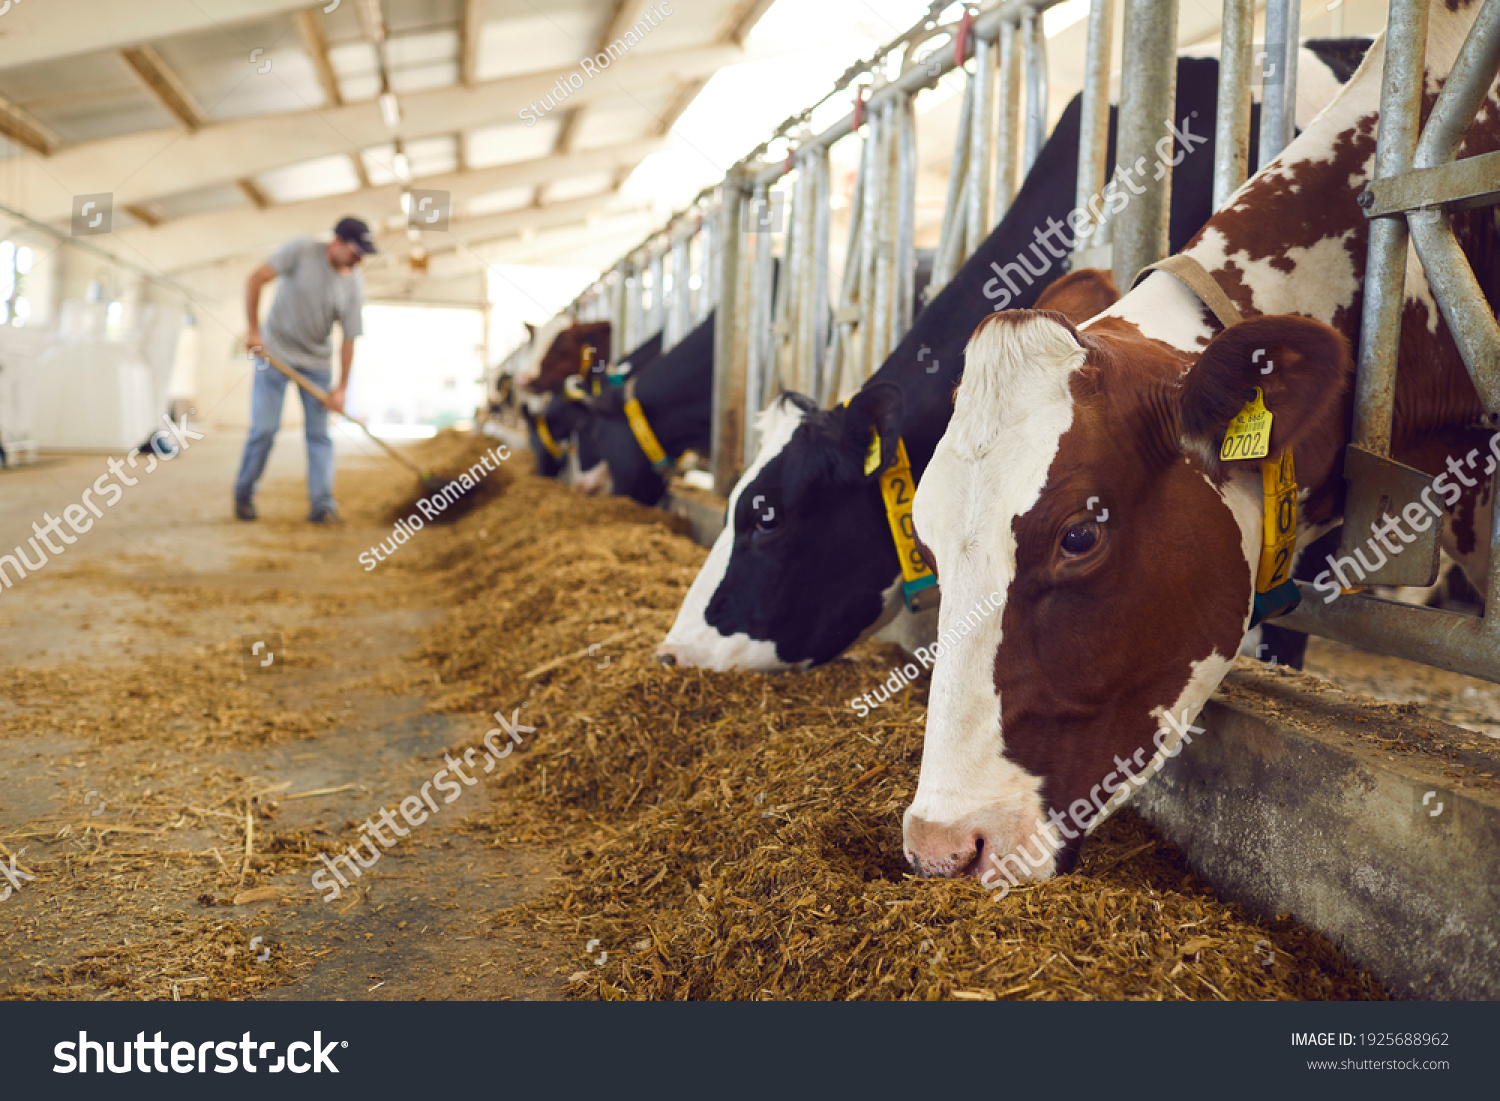 Healthy dairy cows feeding on fodder standing in row of stables in cattle farm barn with worker adding food for animals in blurred background. Concept of farming business and taking care of livestock #1925688962